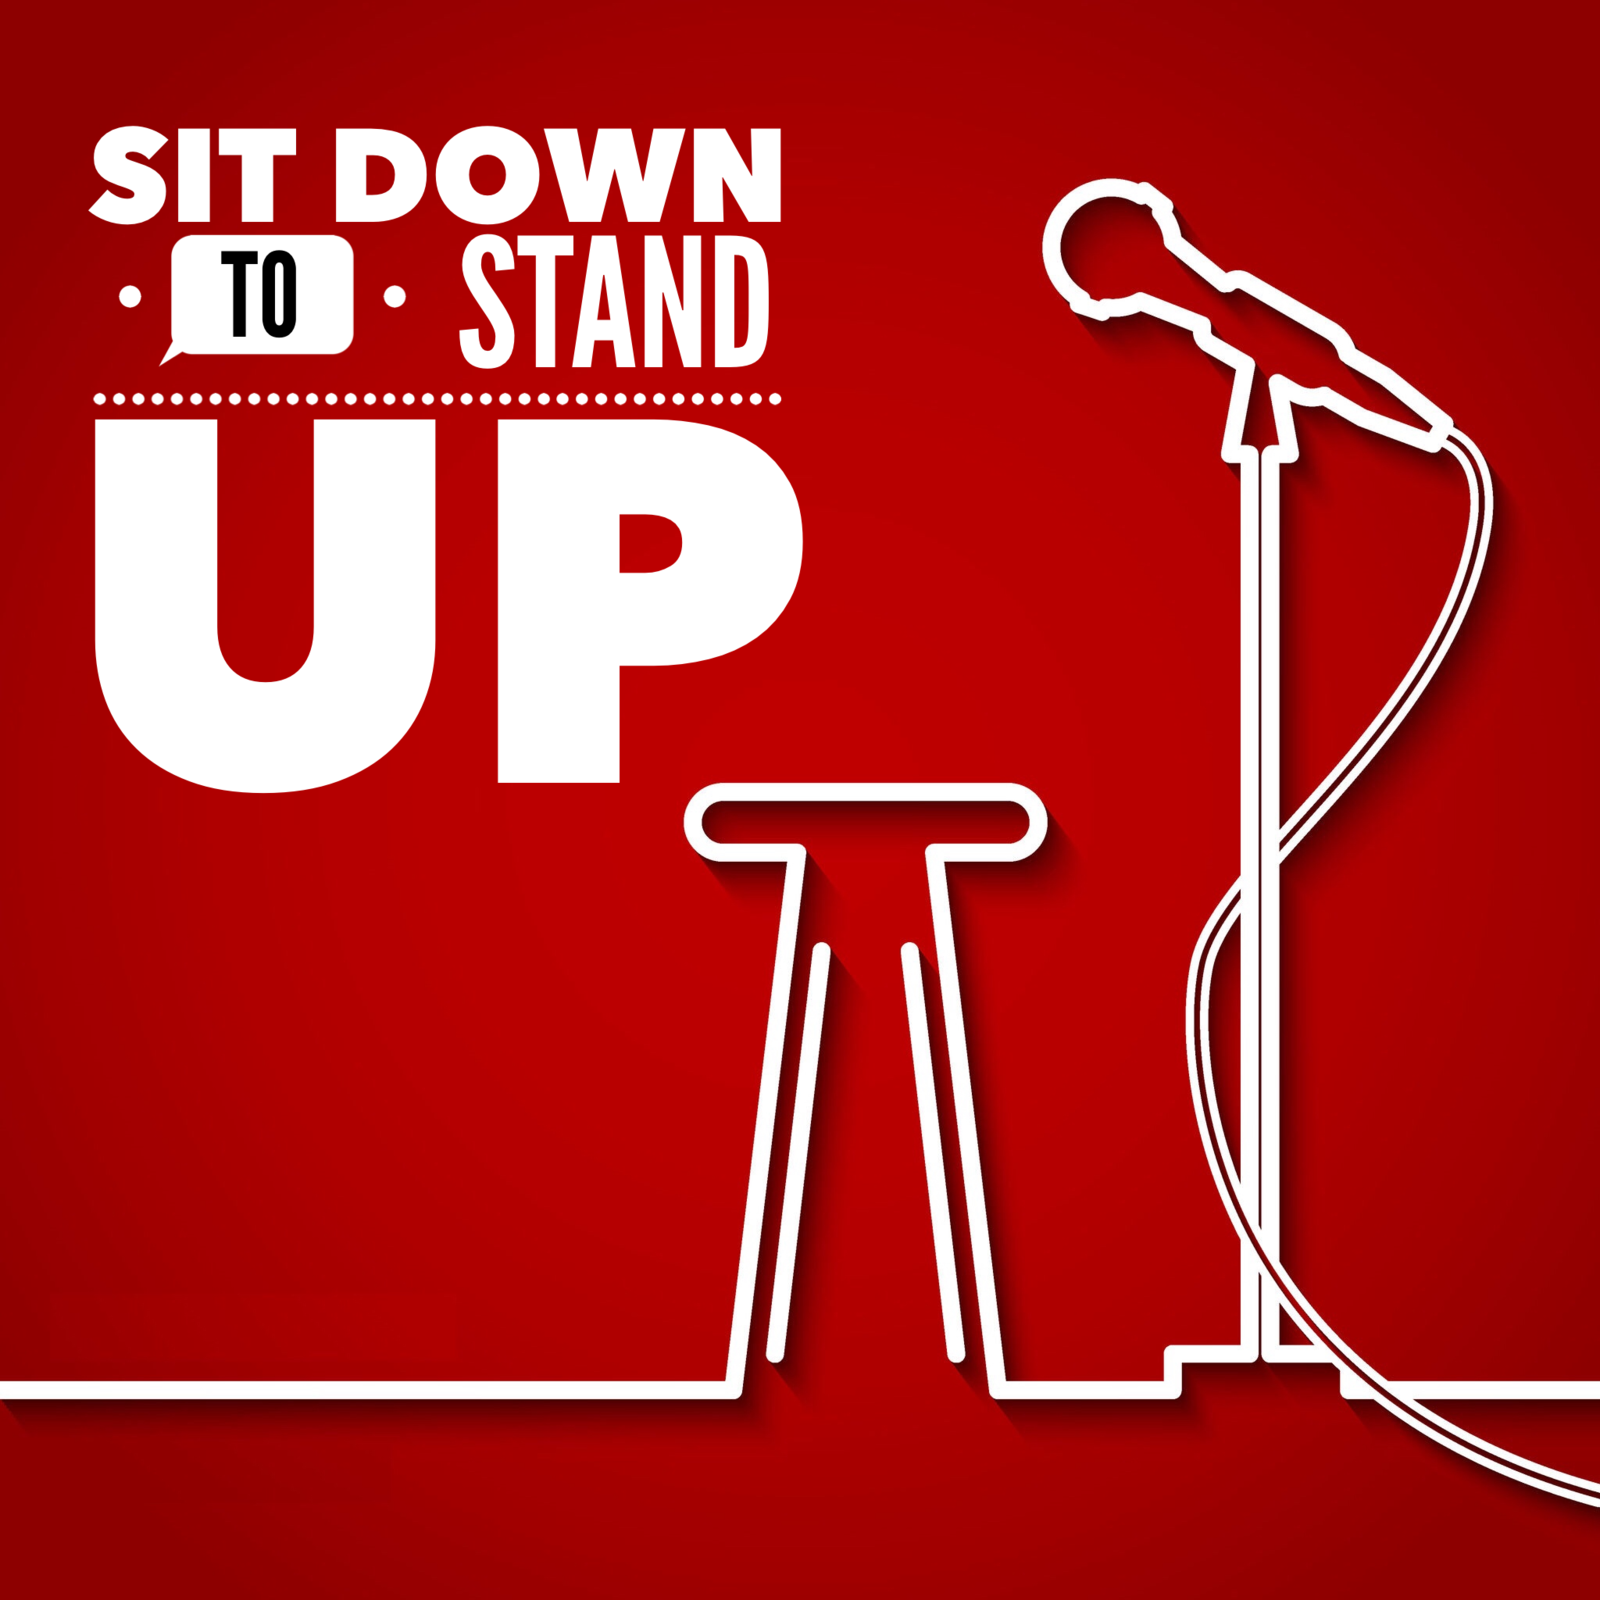 Stand up sit. Stand down. Sit down. Stand up афиша. Will Downing - Stand up.